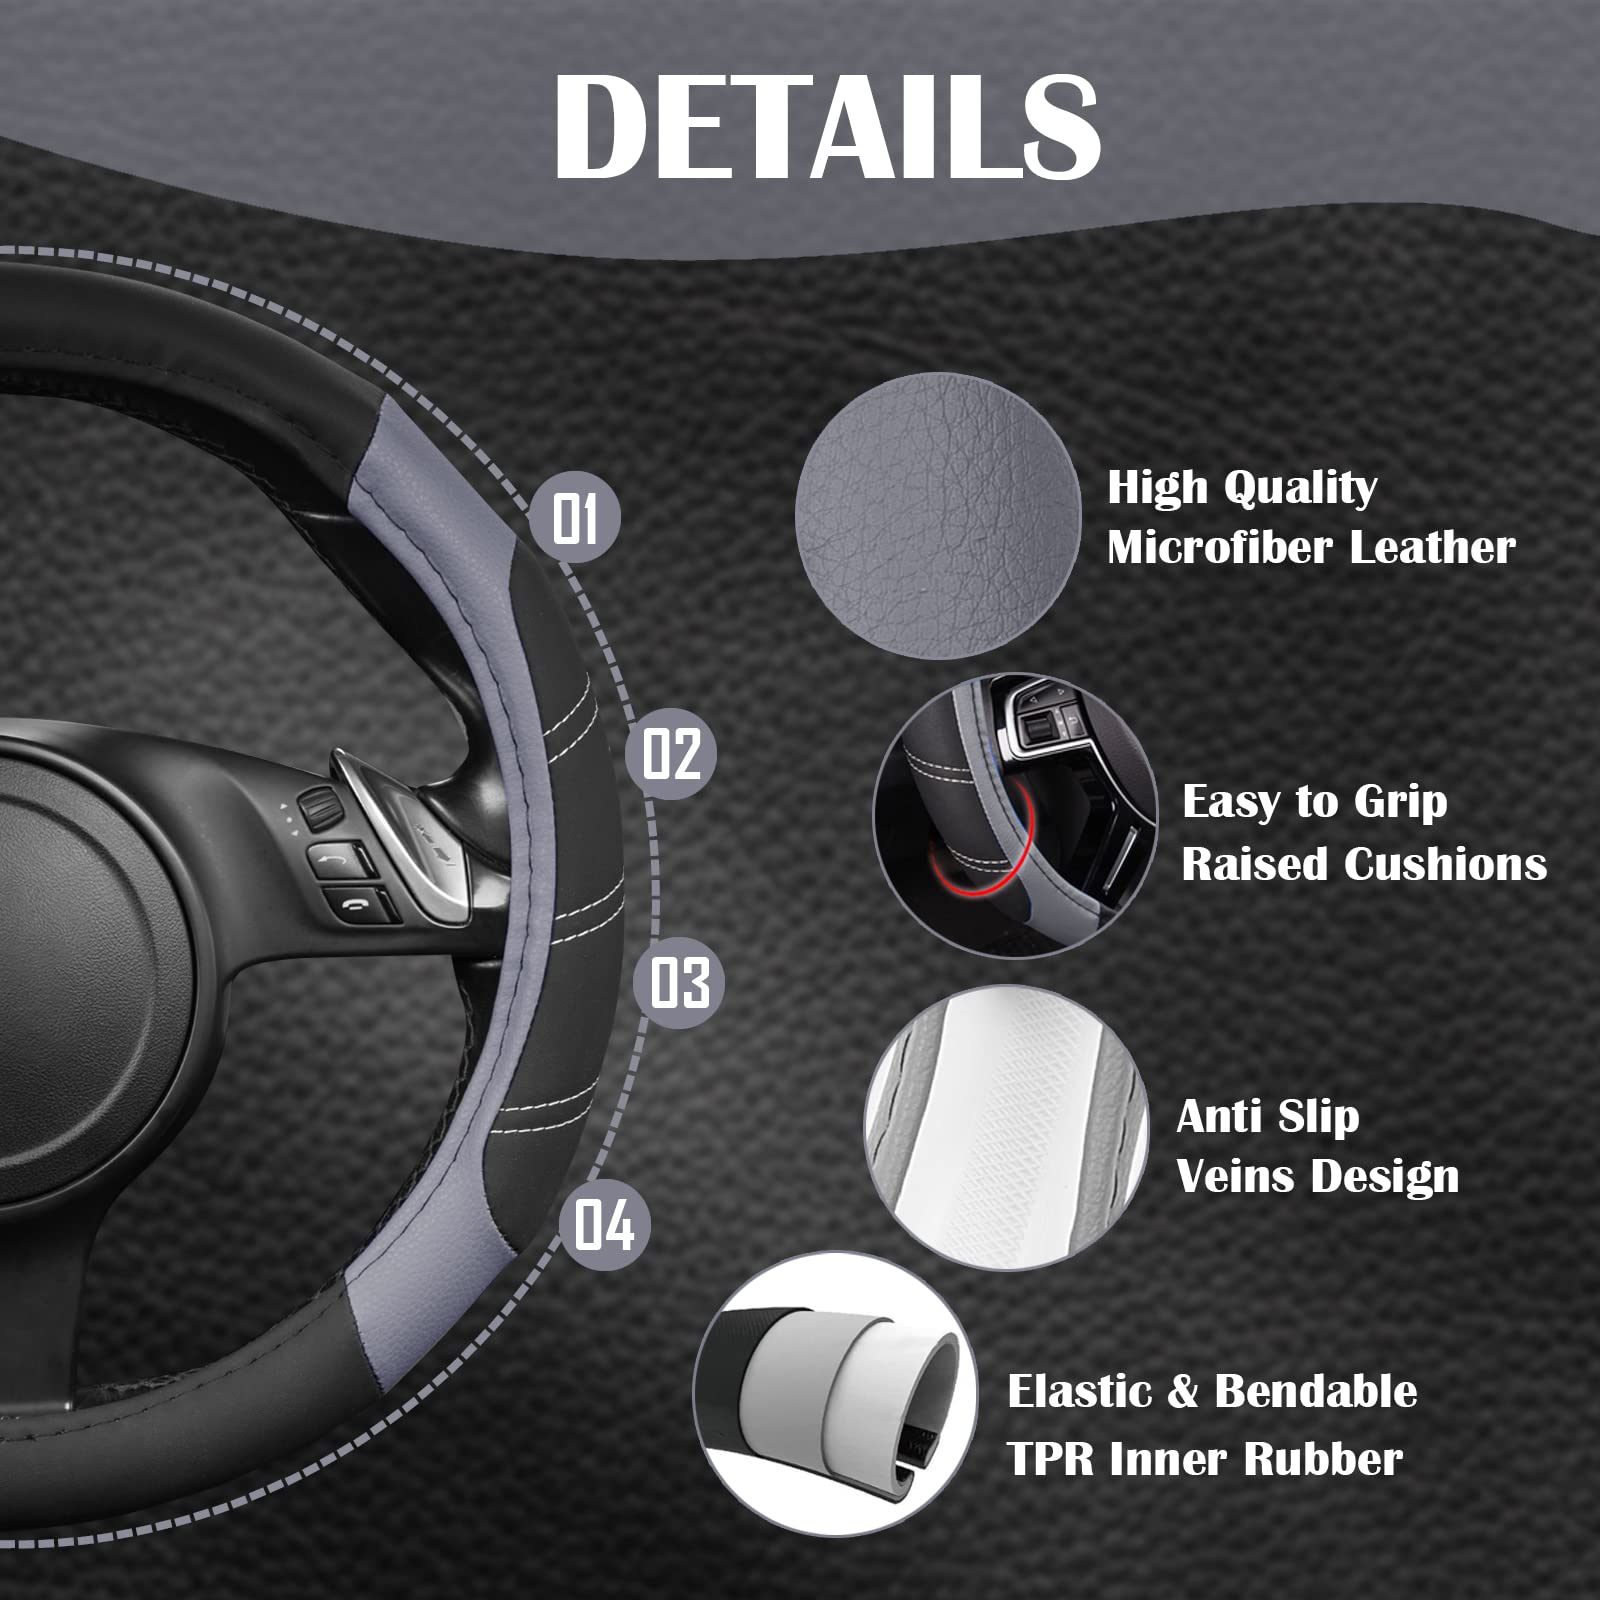 CAR PASS Line Rider Microfiber Leather Sporty Steering Wheel Cover Universal Fits for 95% Truck,SUV,Cars,14.5-15inch Anti-Slip Safety Comfortable Desgin (Black-Gray)